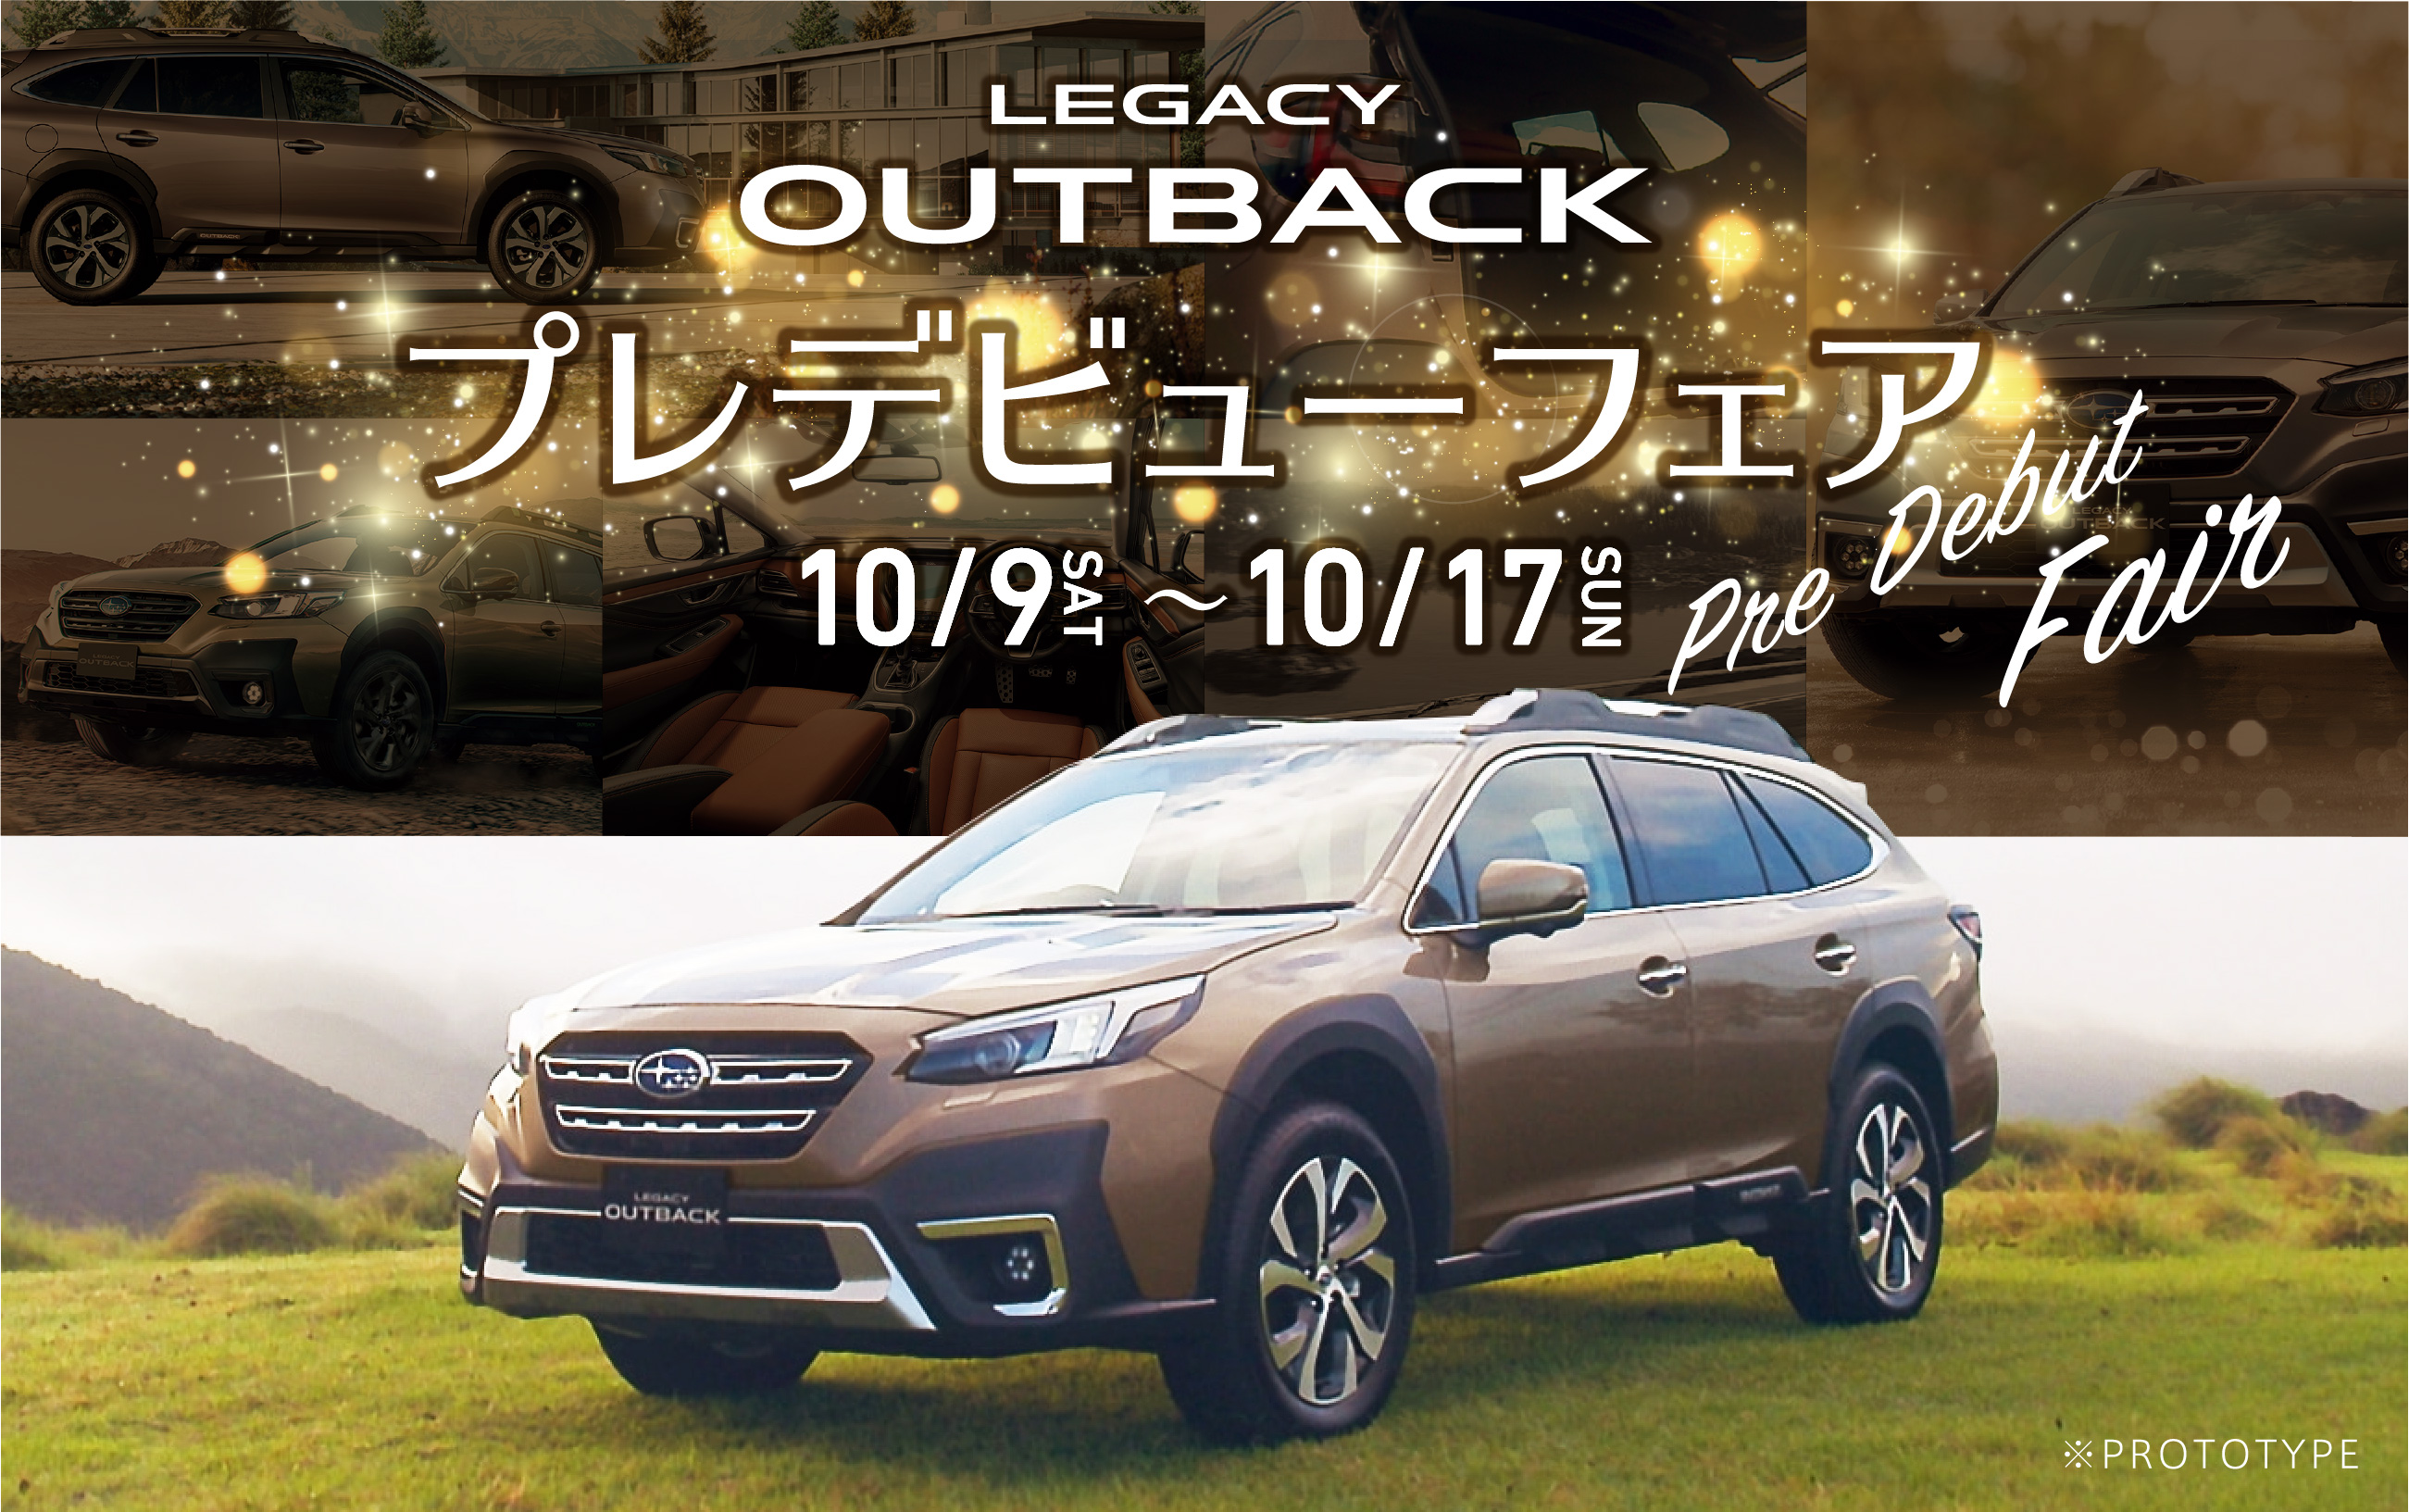 LEGACY OUTBACK　プレデビューフェア10/9〜10/17